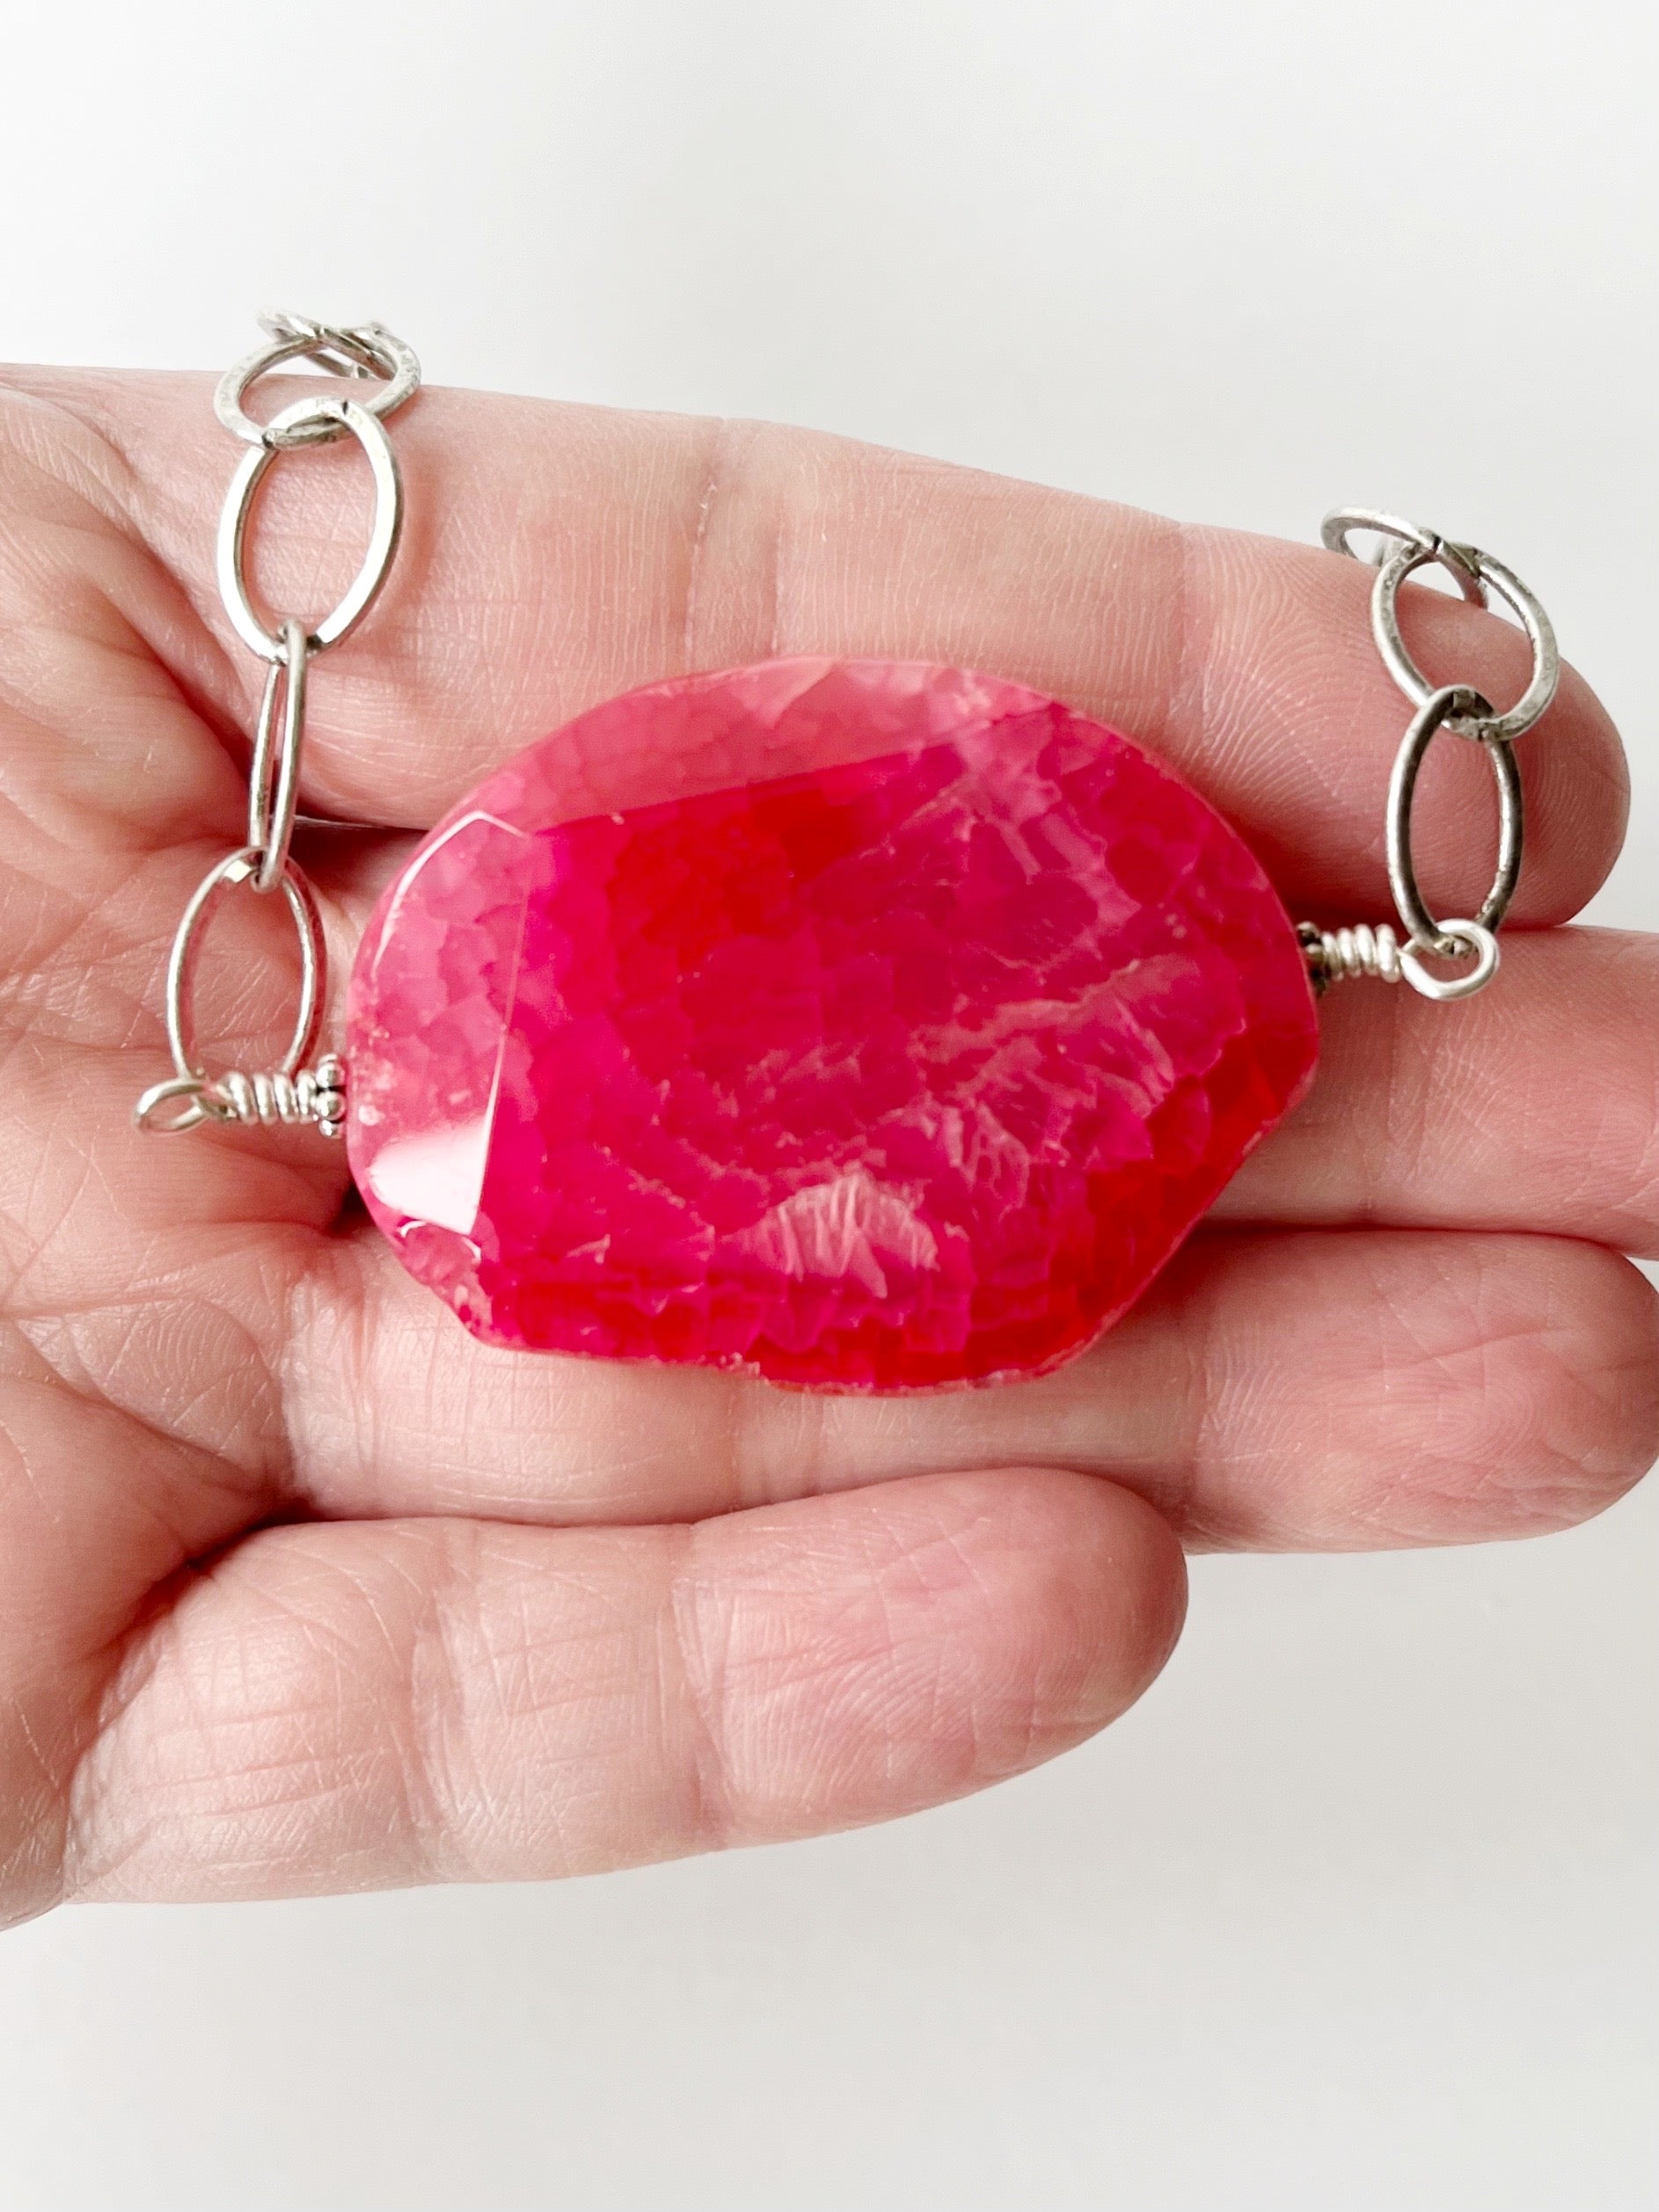 pink agate pendant necklace displayed on hand